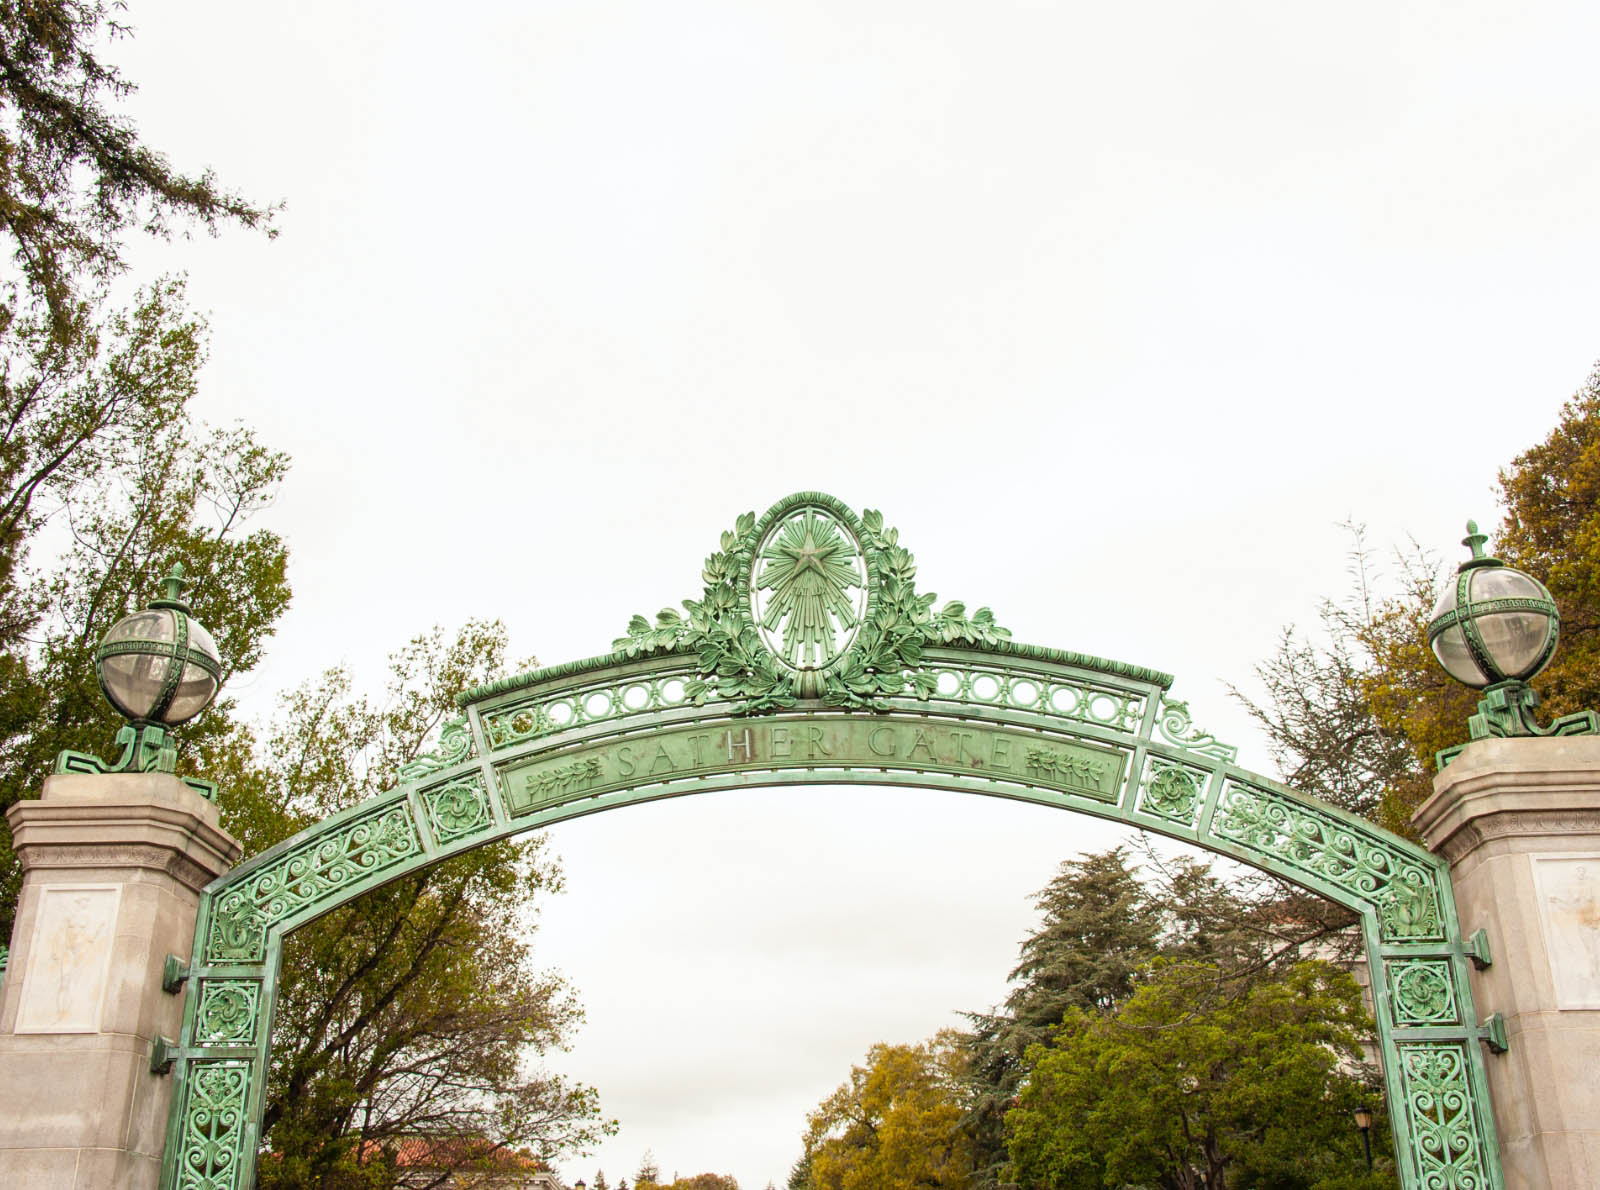 Photo of the Sather Gate on UC Berkeley Campus